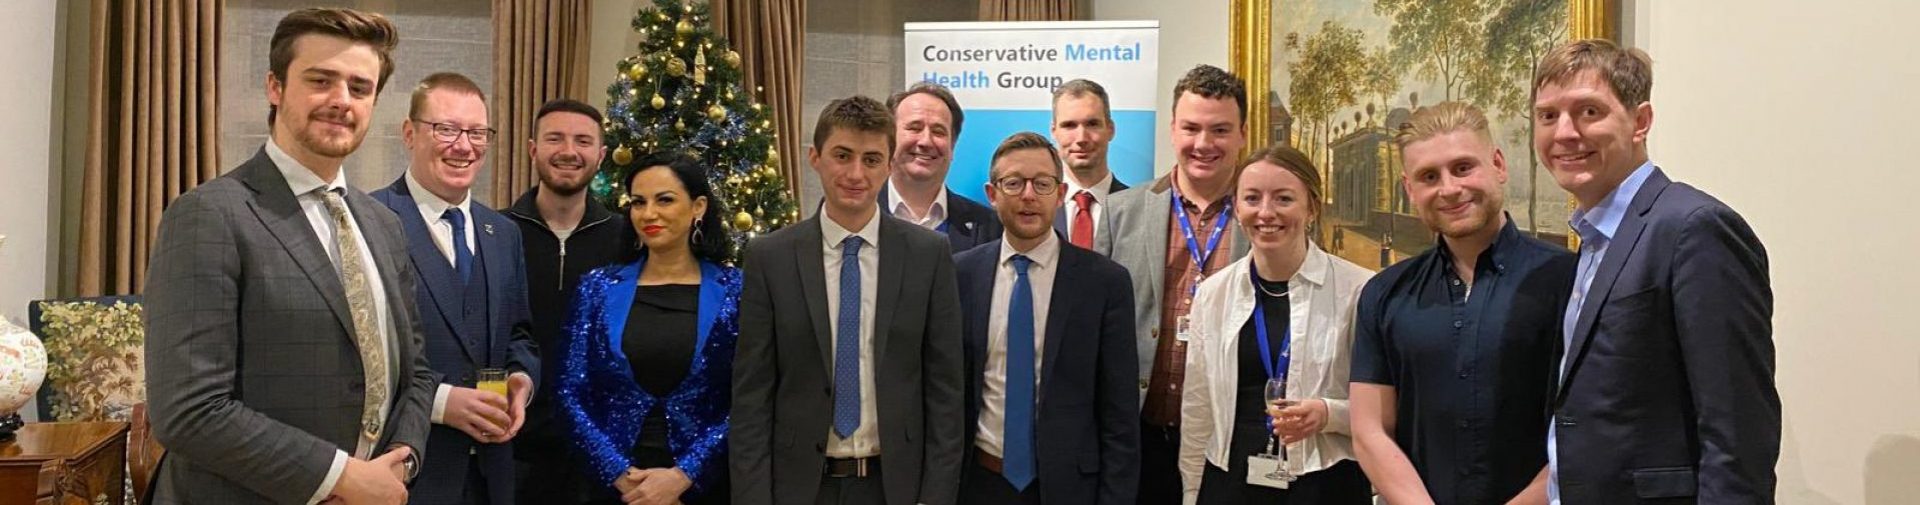 The Conservative Mental Health Group